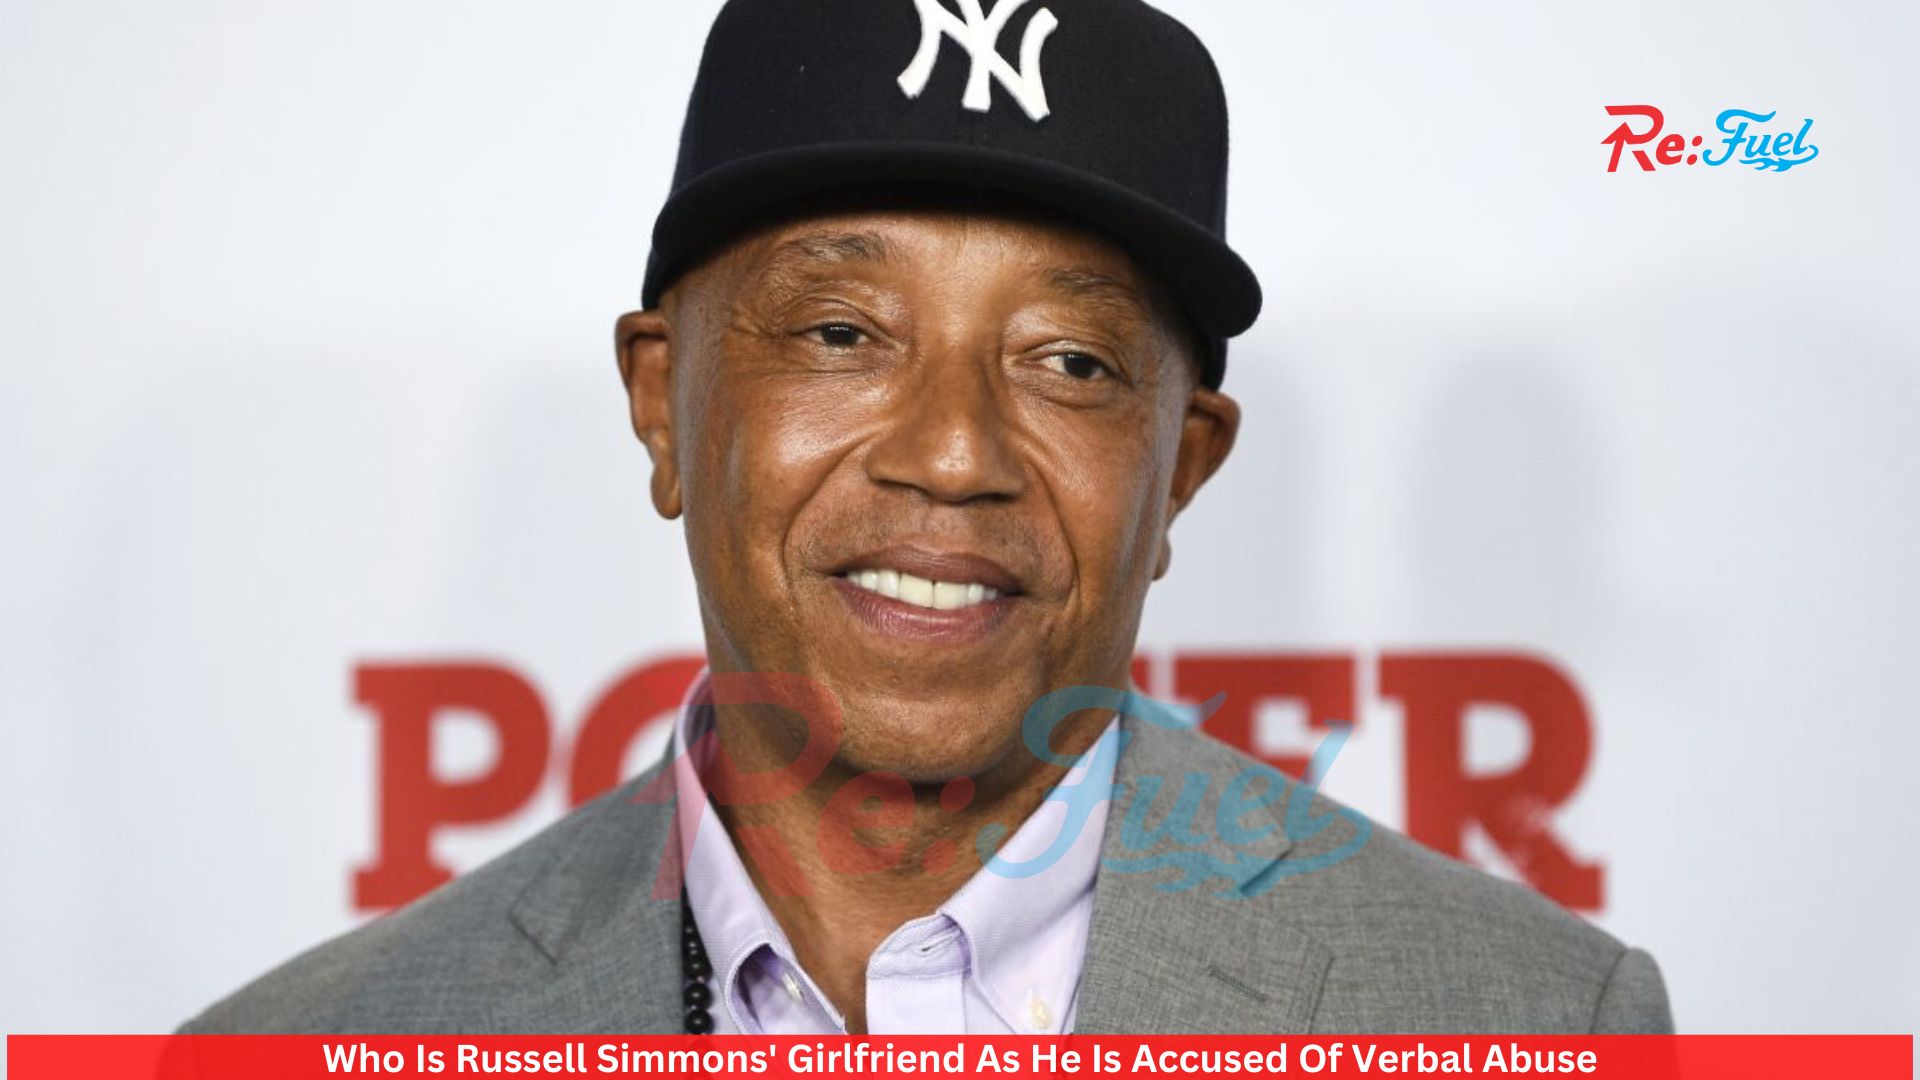 Who Is Russell Simmons' Girlfriend As He Is Accused Of Verbal Abuse